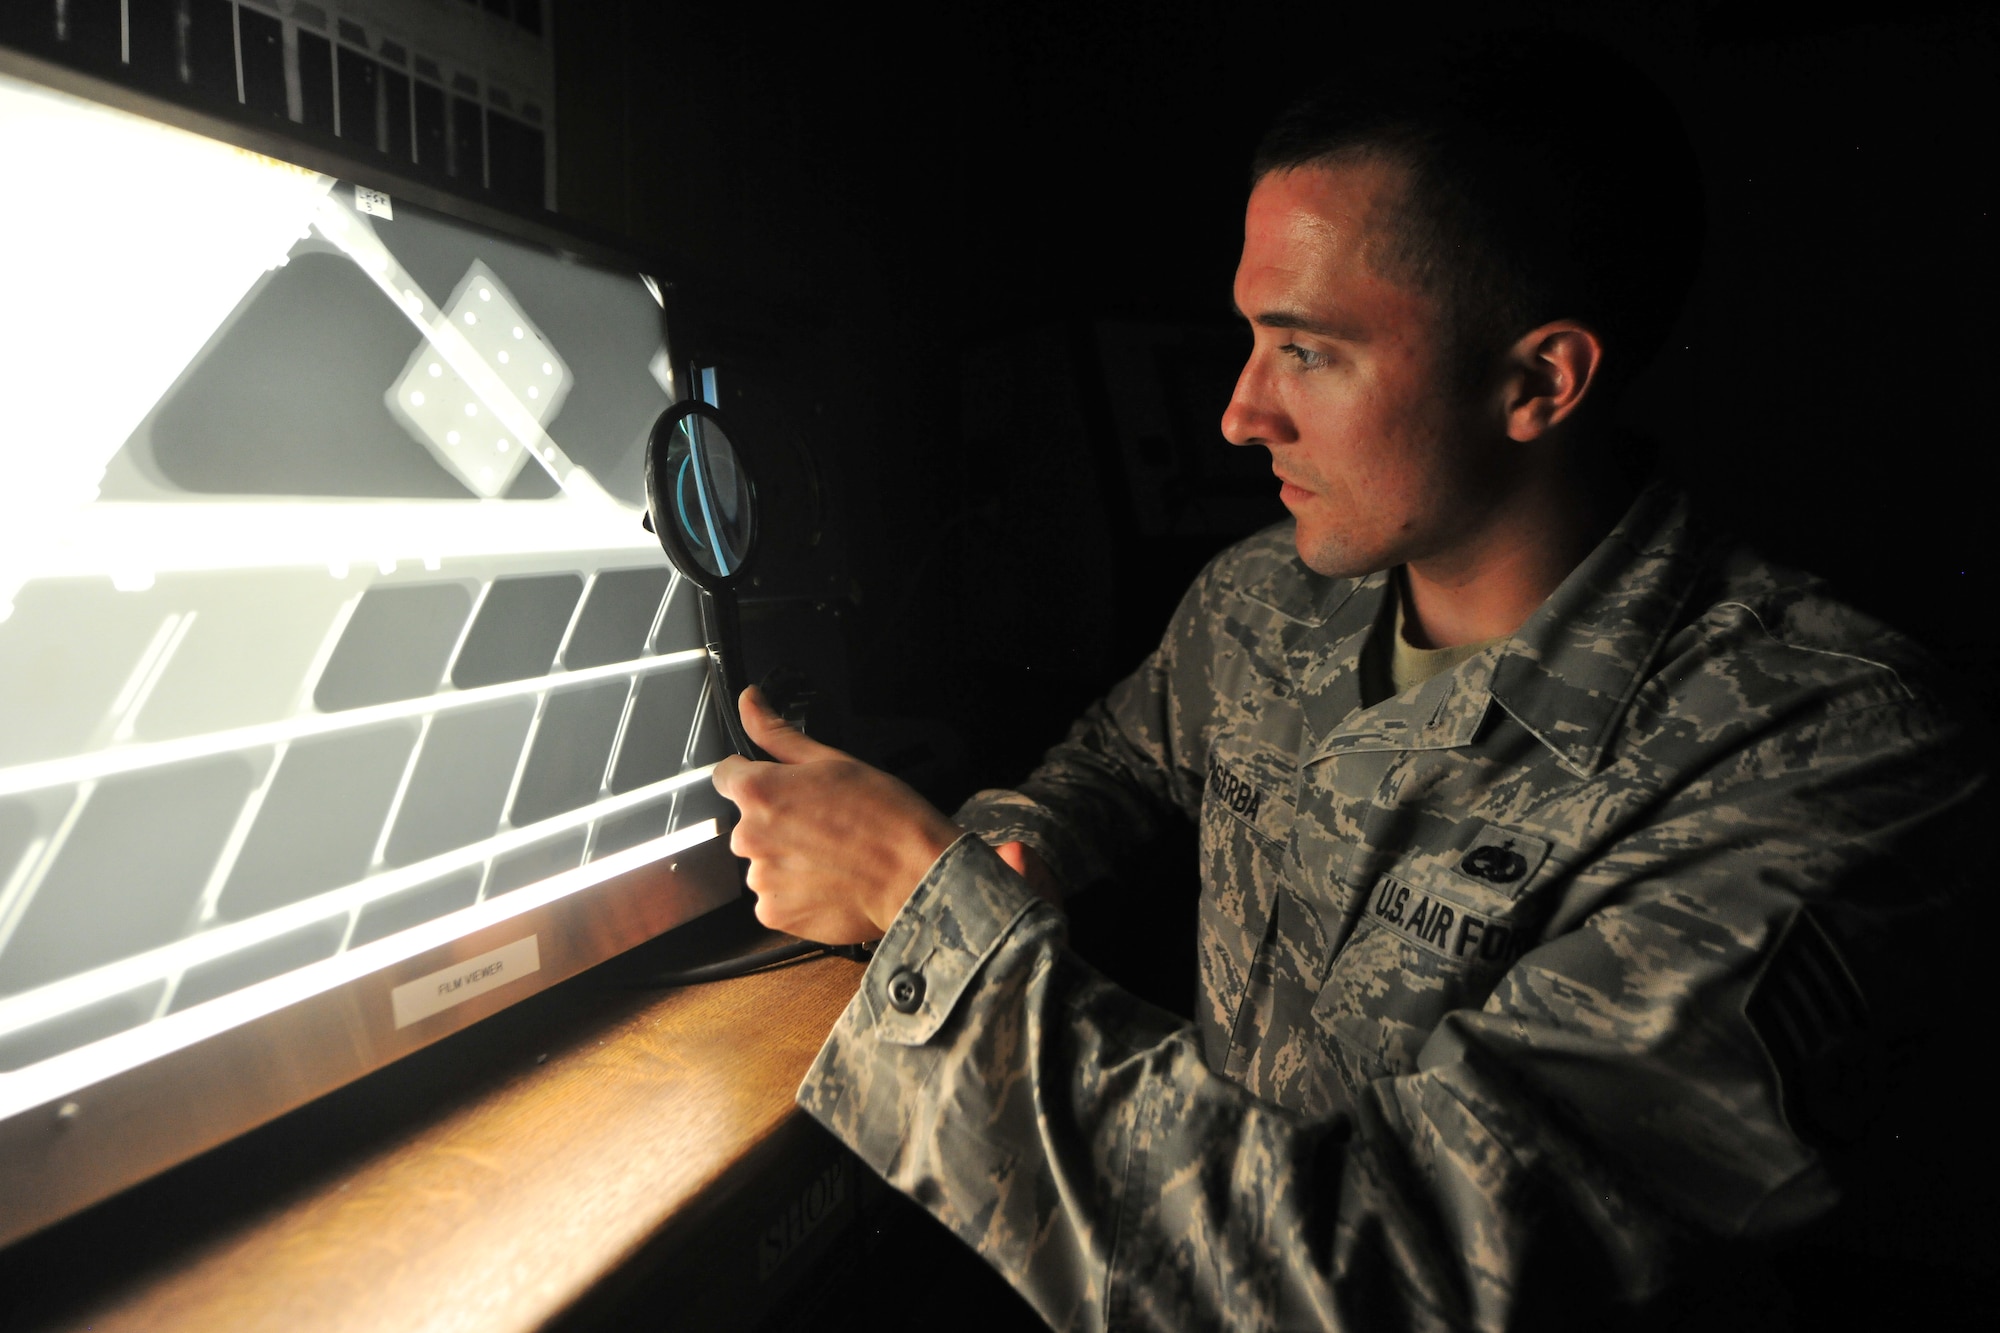 Staff Sgt. Joshua Paserba, 86th Maintenance Squadron nondestructive inspection technician, views a radiographic image of an aircraft’s internal structure, July 31, 2013, Ramstein Air Base, Germany.  Much like a medical x-ray examining bone fractures, NDI x-rays aircraft structures to pinpoint cracks in critical structures. (U.S. Air Force photo/Senior Airman Chris Willis)